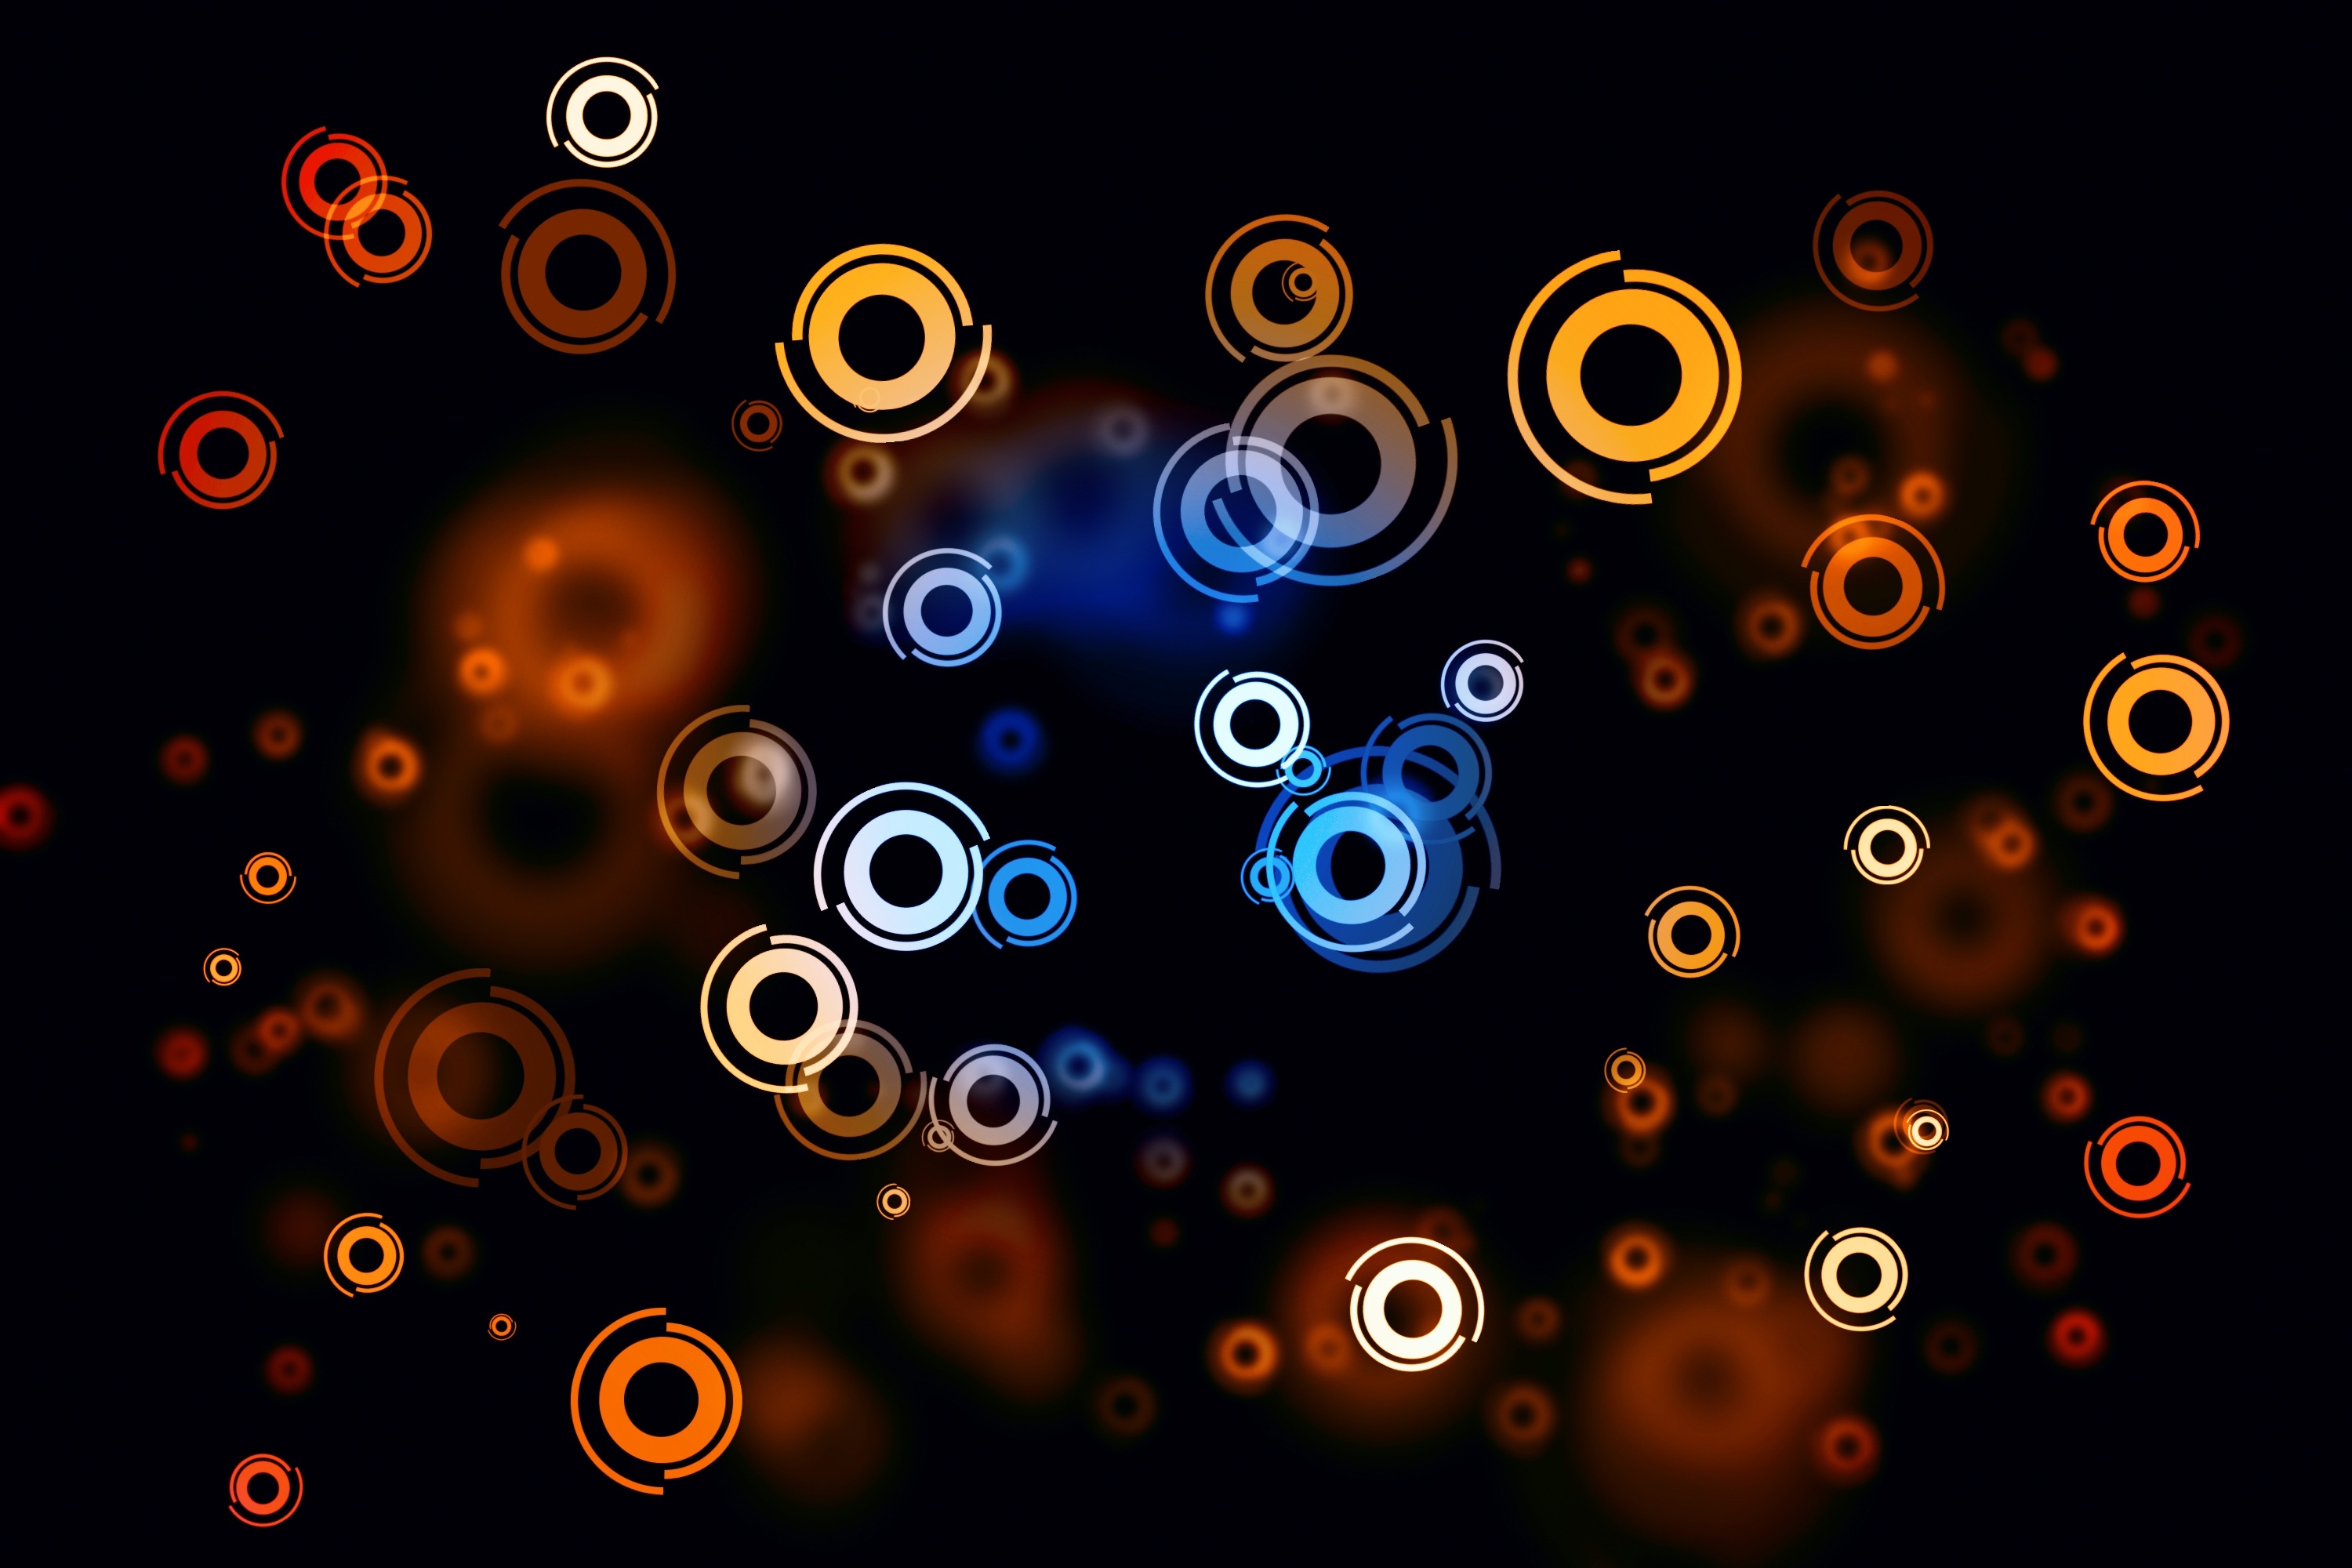 Wallpapers wallpaper design colorful circles new year on the desktop